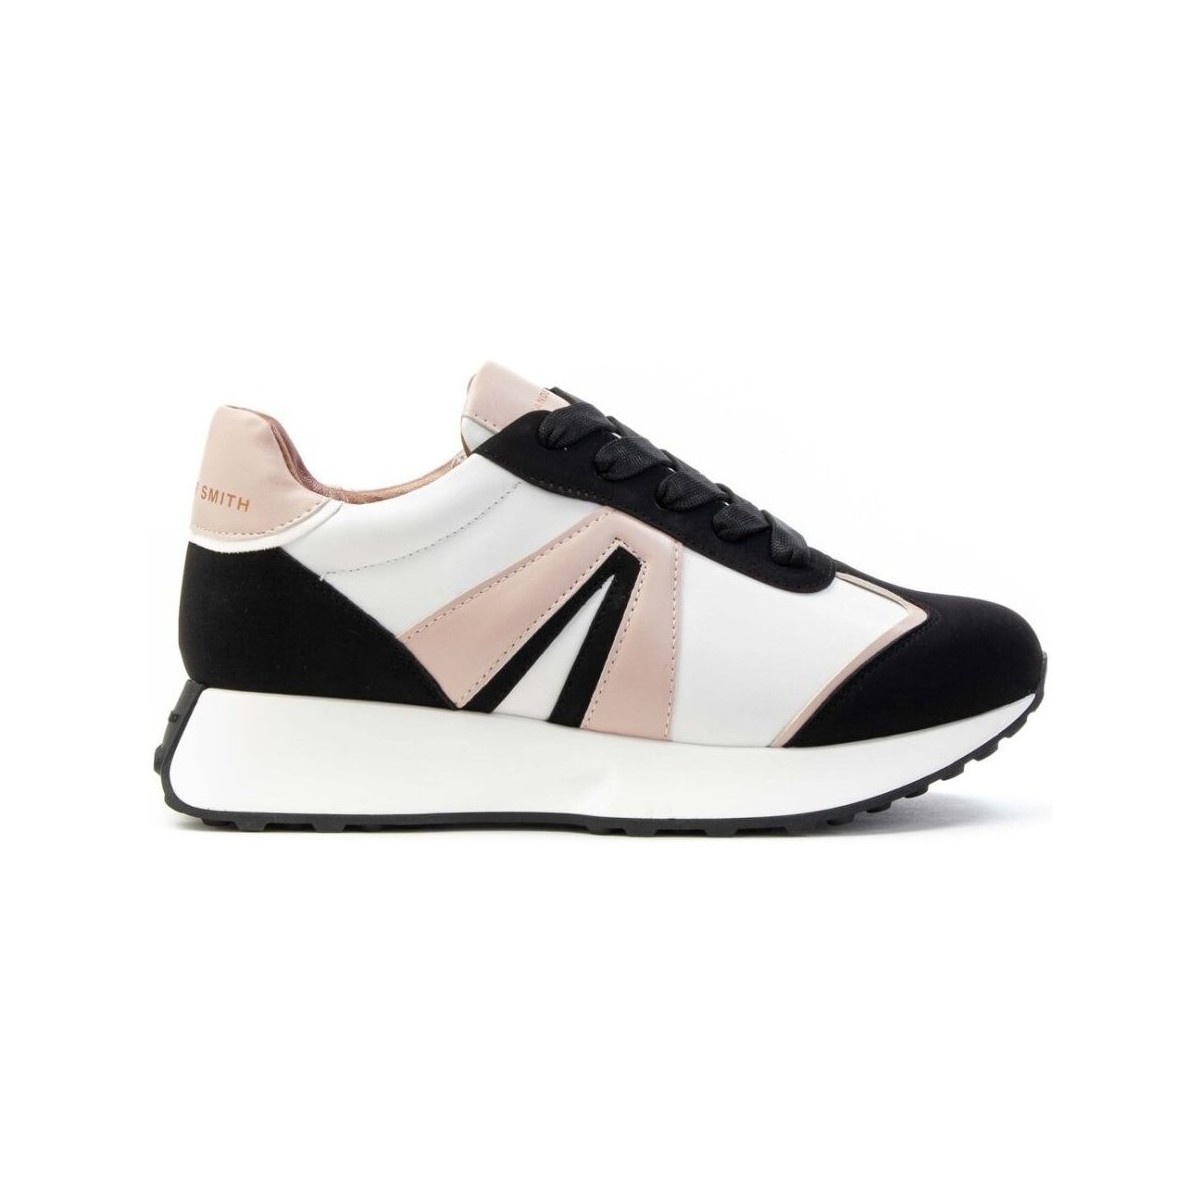 Scarpe Donna Trekking Alexander Smith Piccadilly Scarpe Sneakers Donna White_nude